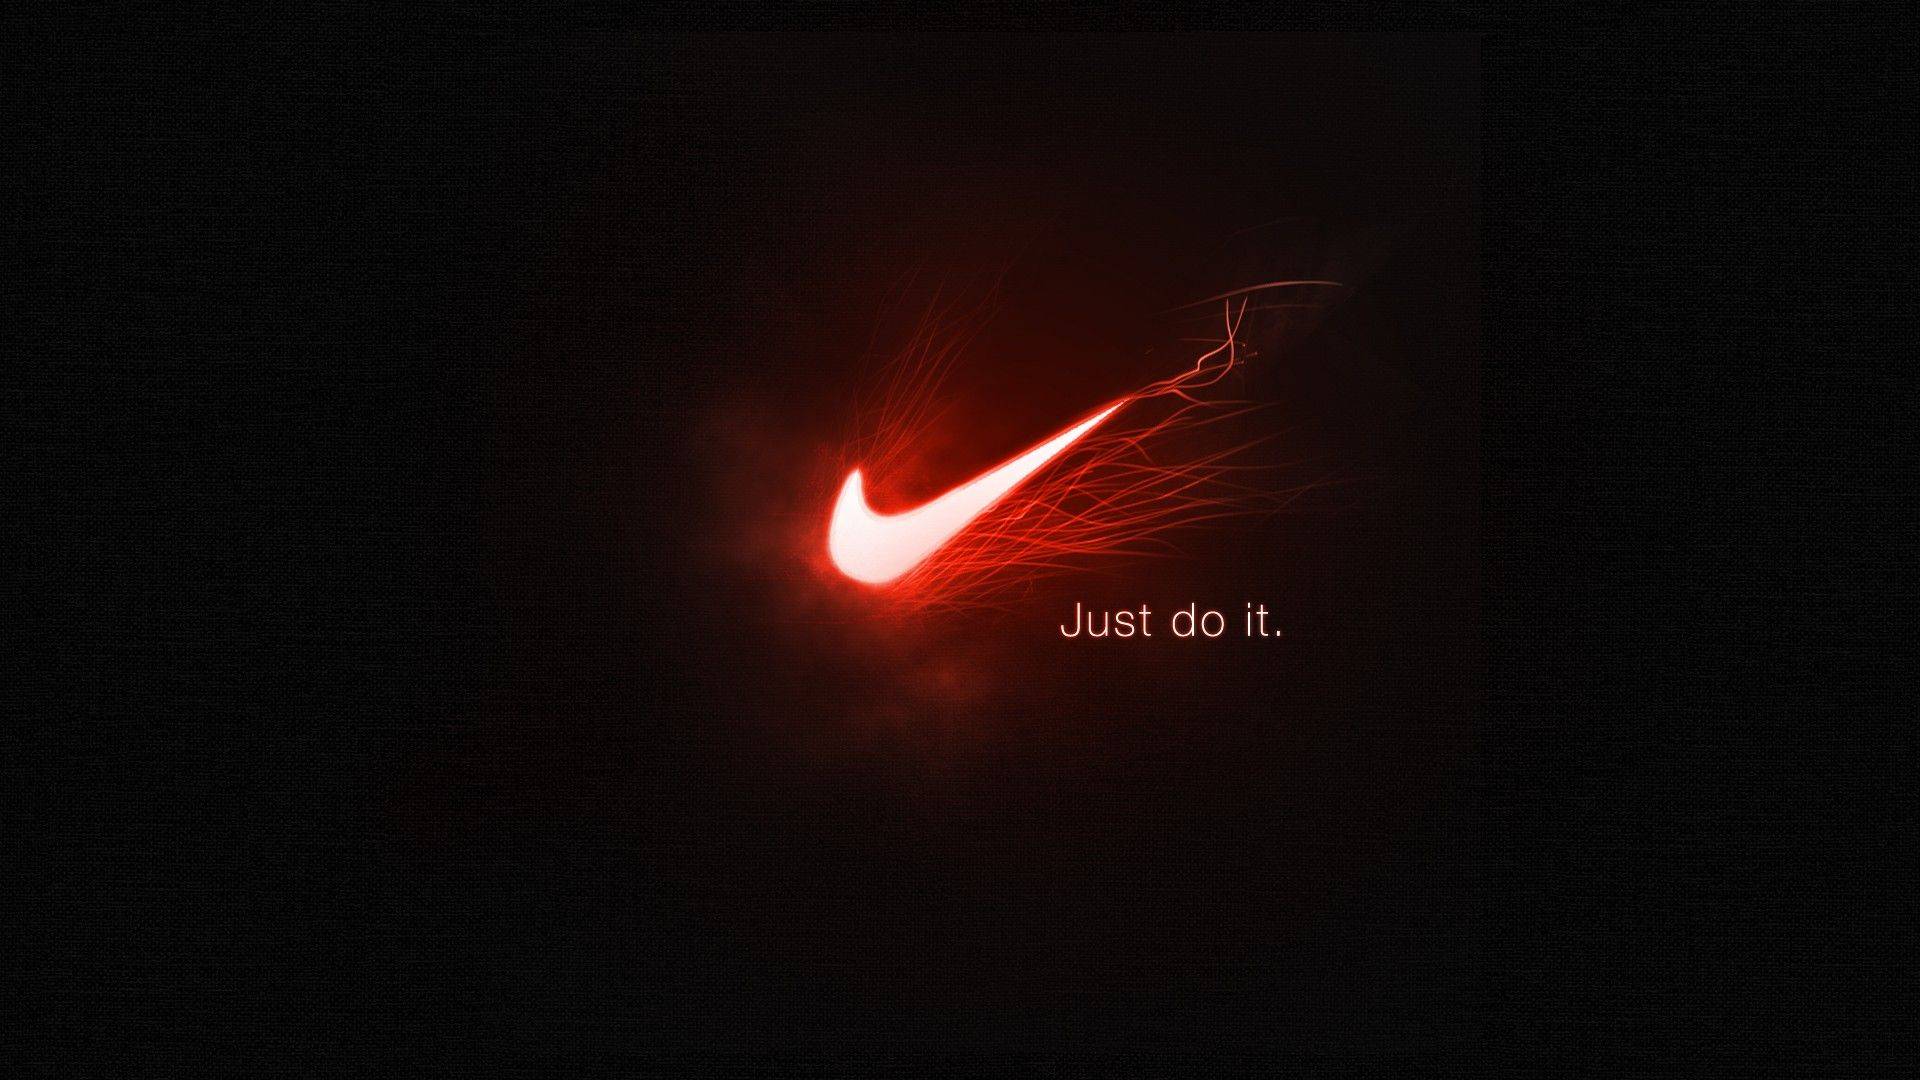 Blue and Black Nike Logo - Nike 3D Wallpapers - Wallpaper Cave